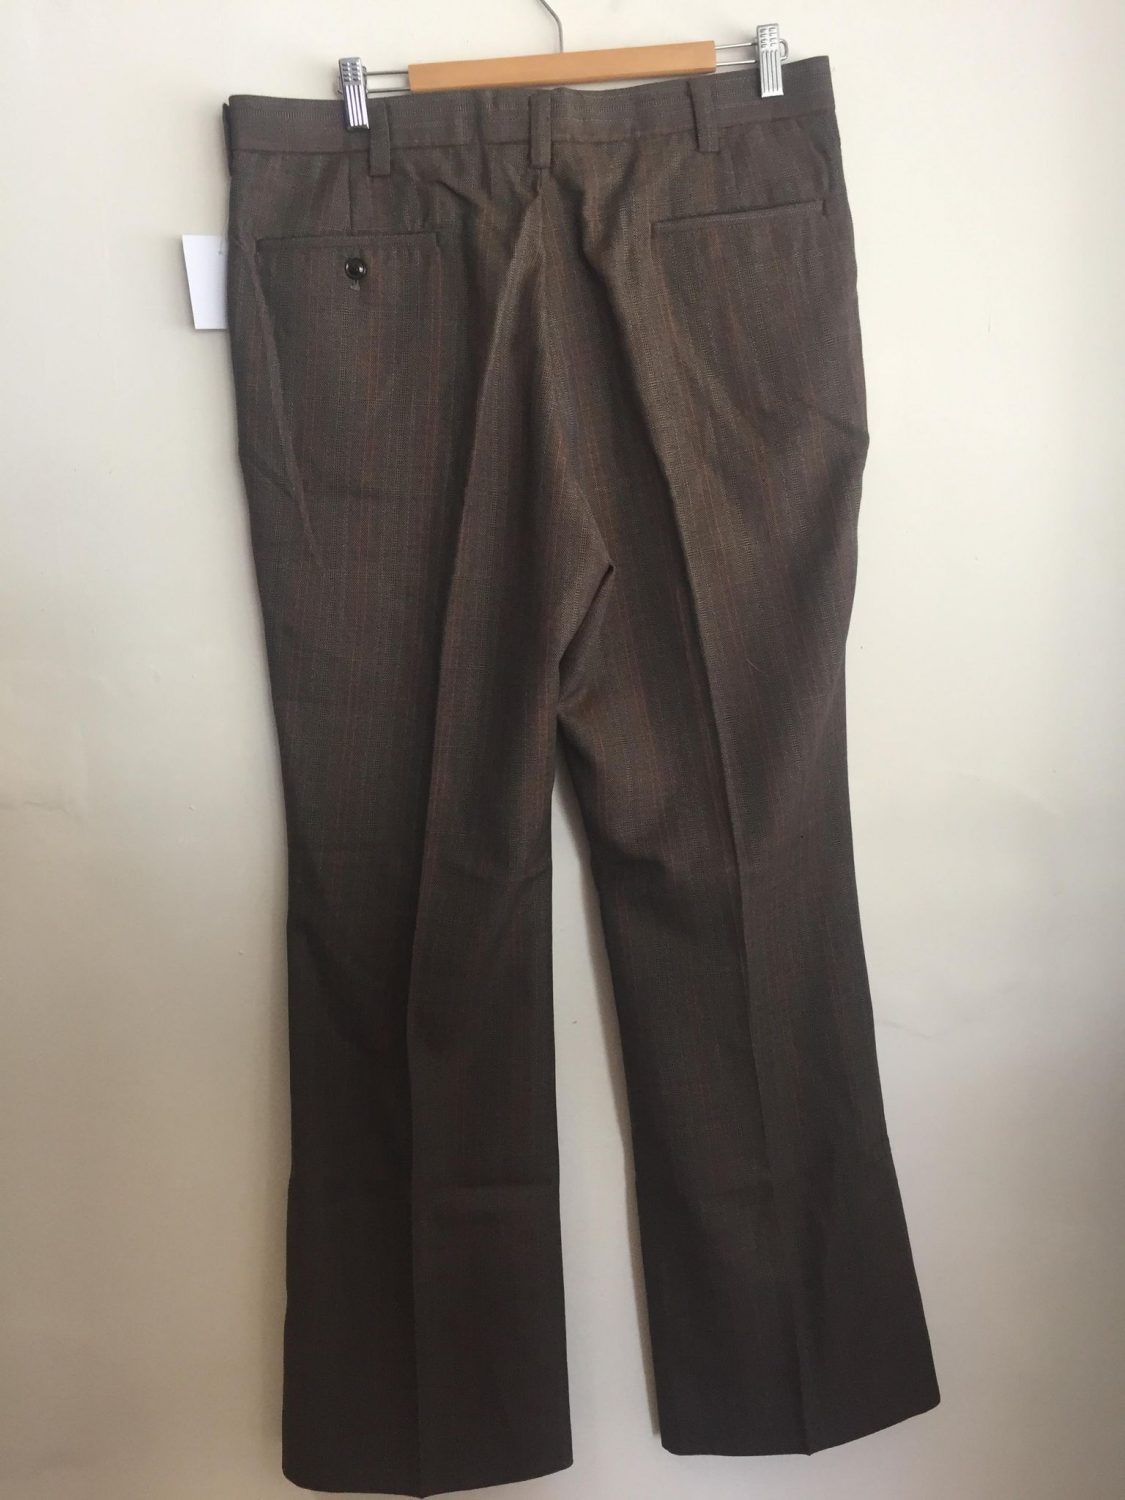 DEADSTOCK VINTAGE 1970S BROWN WITH BLUE WEAVE MENS FLARE PANTS FLARES ...